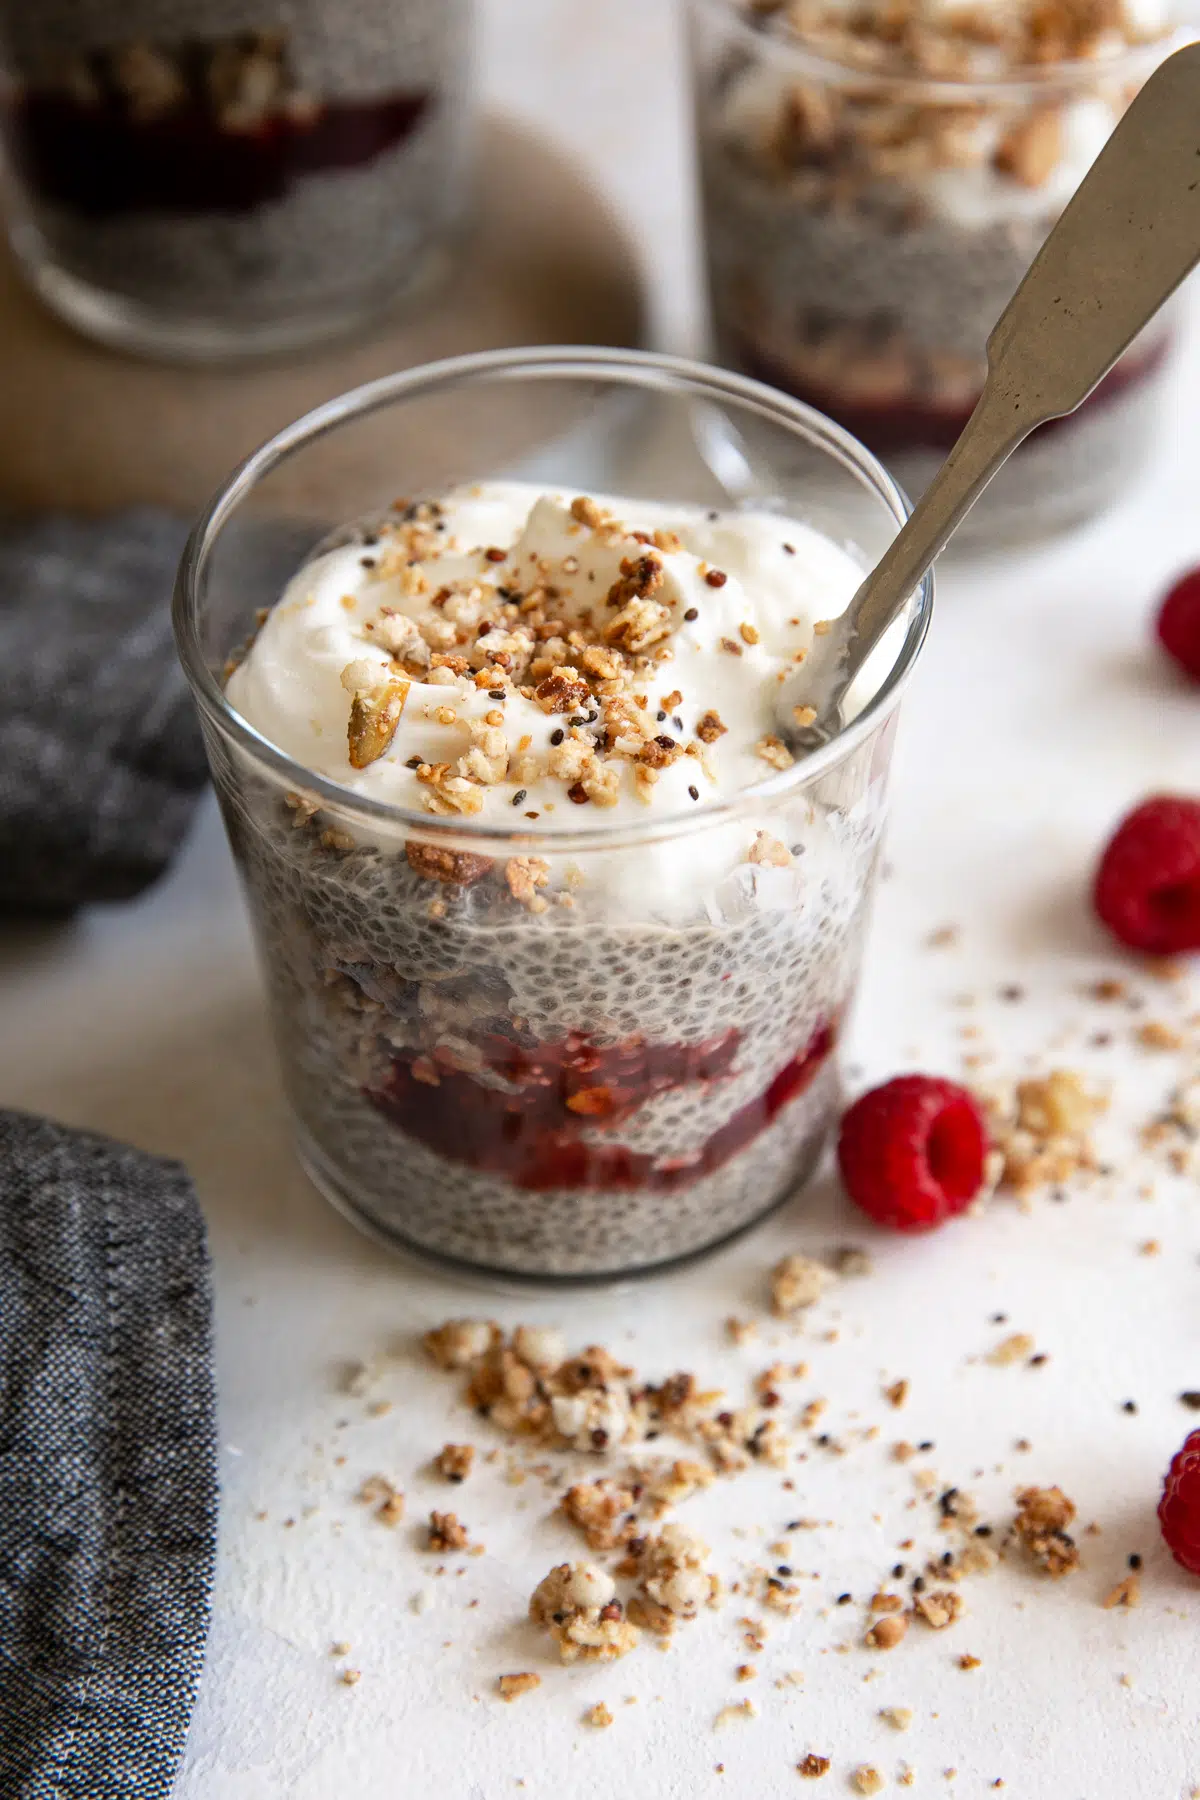 Image of a glass jar filled with vanilla chia seed pudding flavored with raspberry jam and granola.